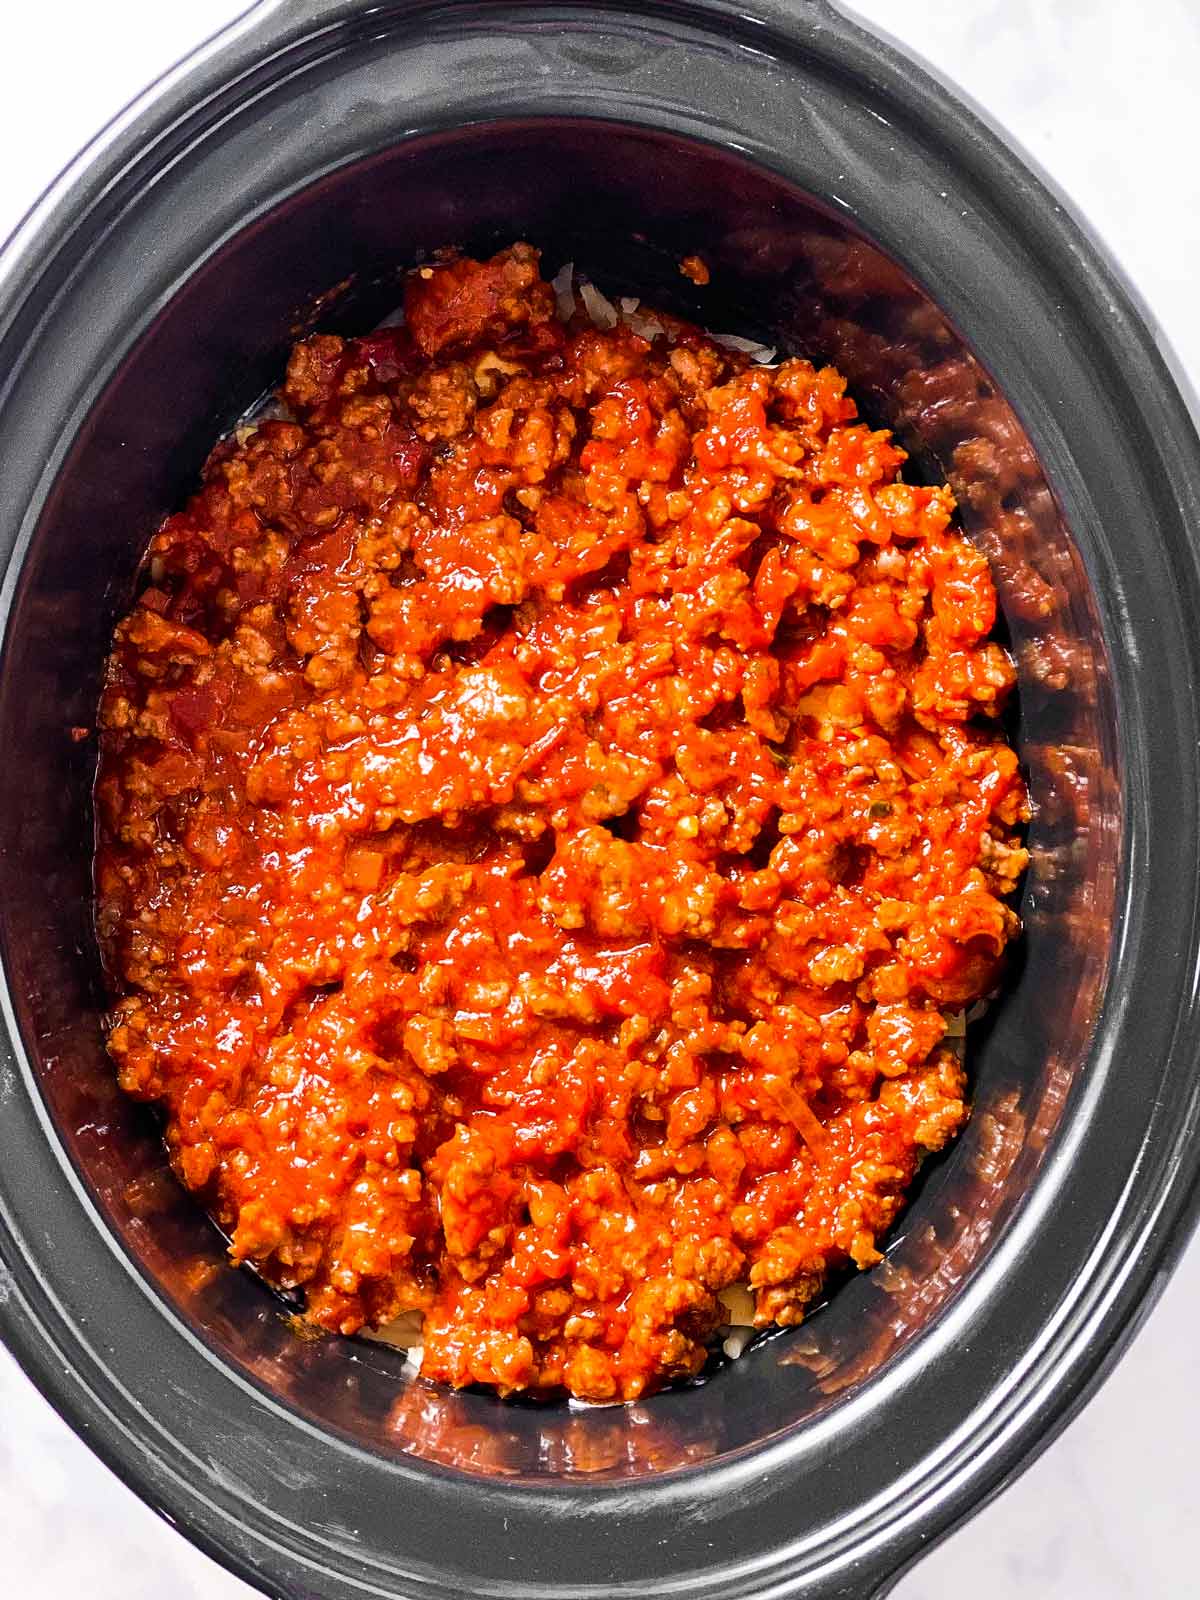 meat sauce in black crock (second layer)